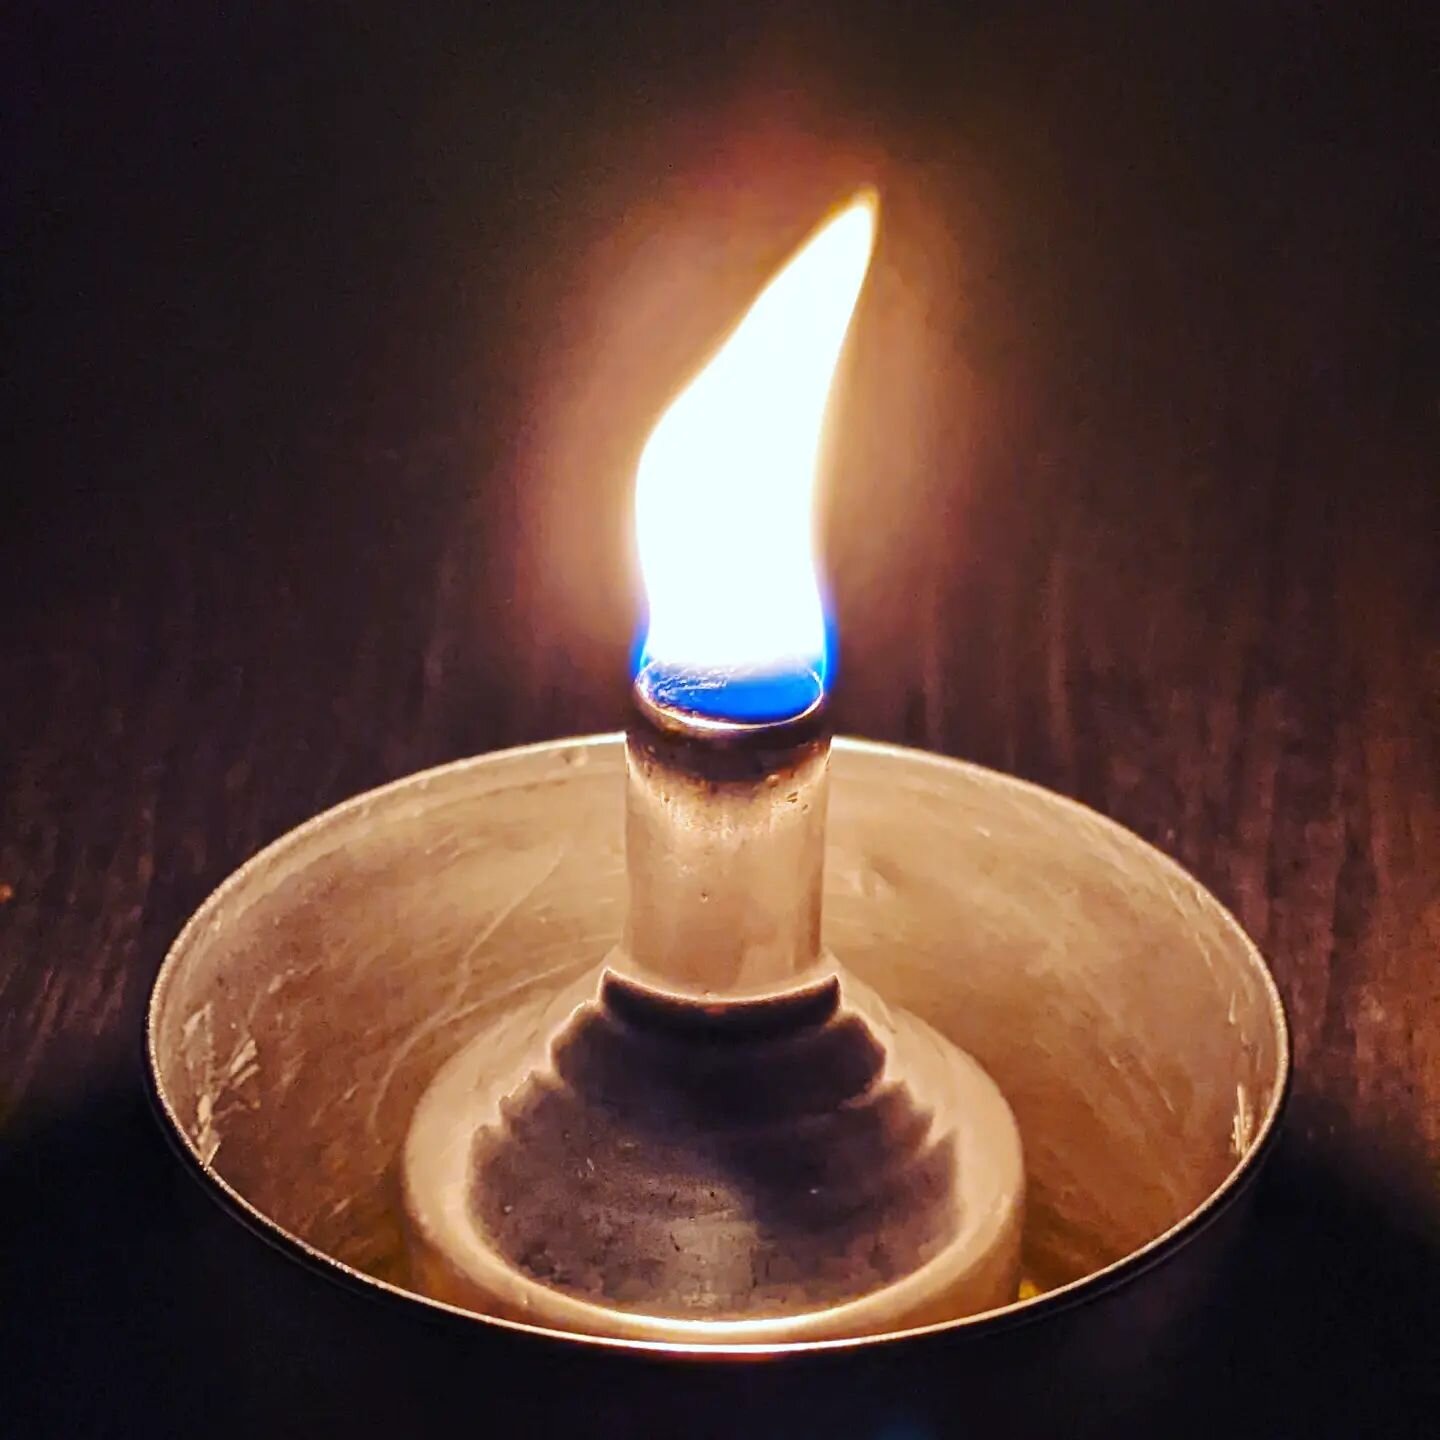 The menorah and the hanukkah lamp were originally fueled by olive oil, not candles. I used a measuring cup, a funnel, and a shred of an old cotton towel to see if I could make it work.

#oliveoil #lamp #cotton #menorah #universalenlightenment